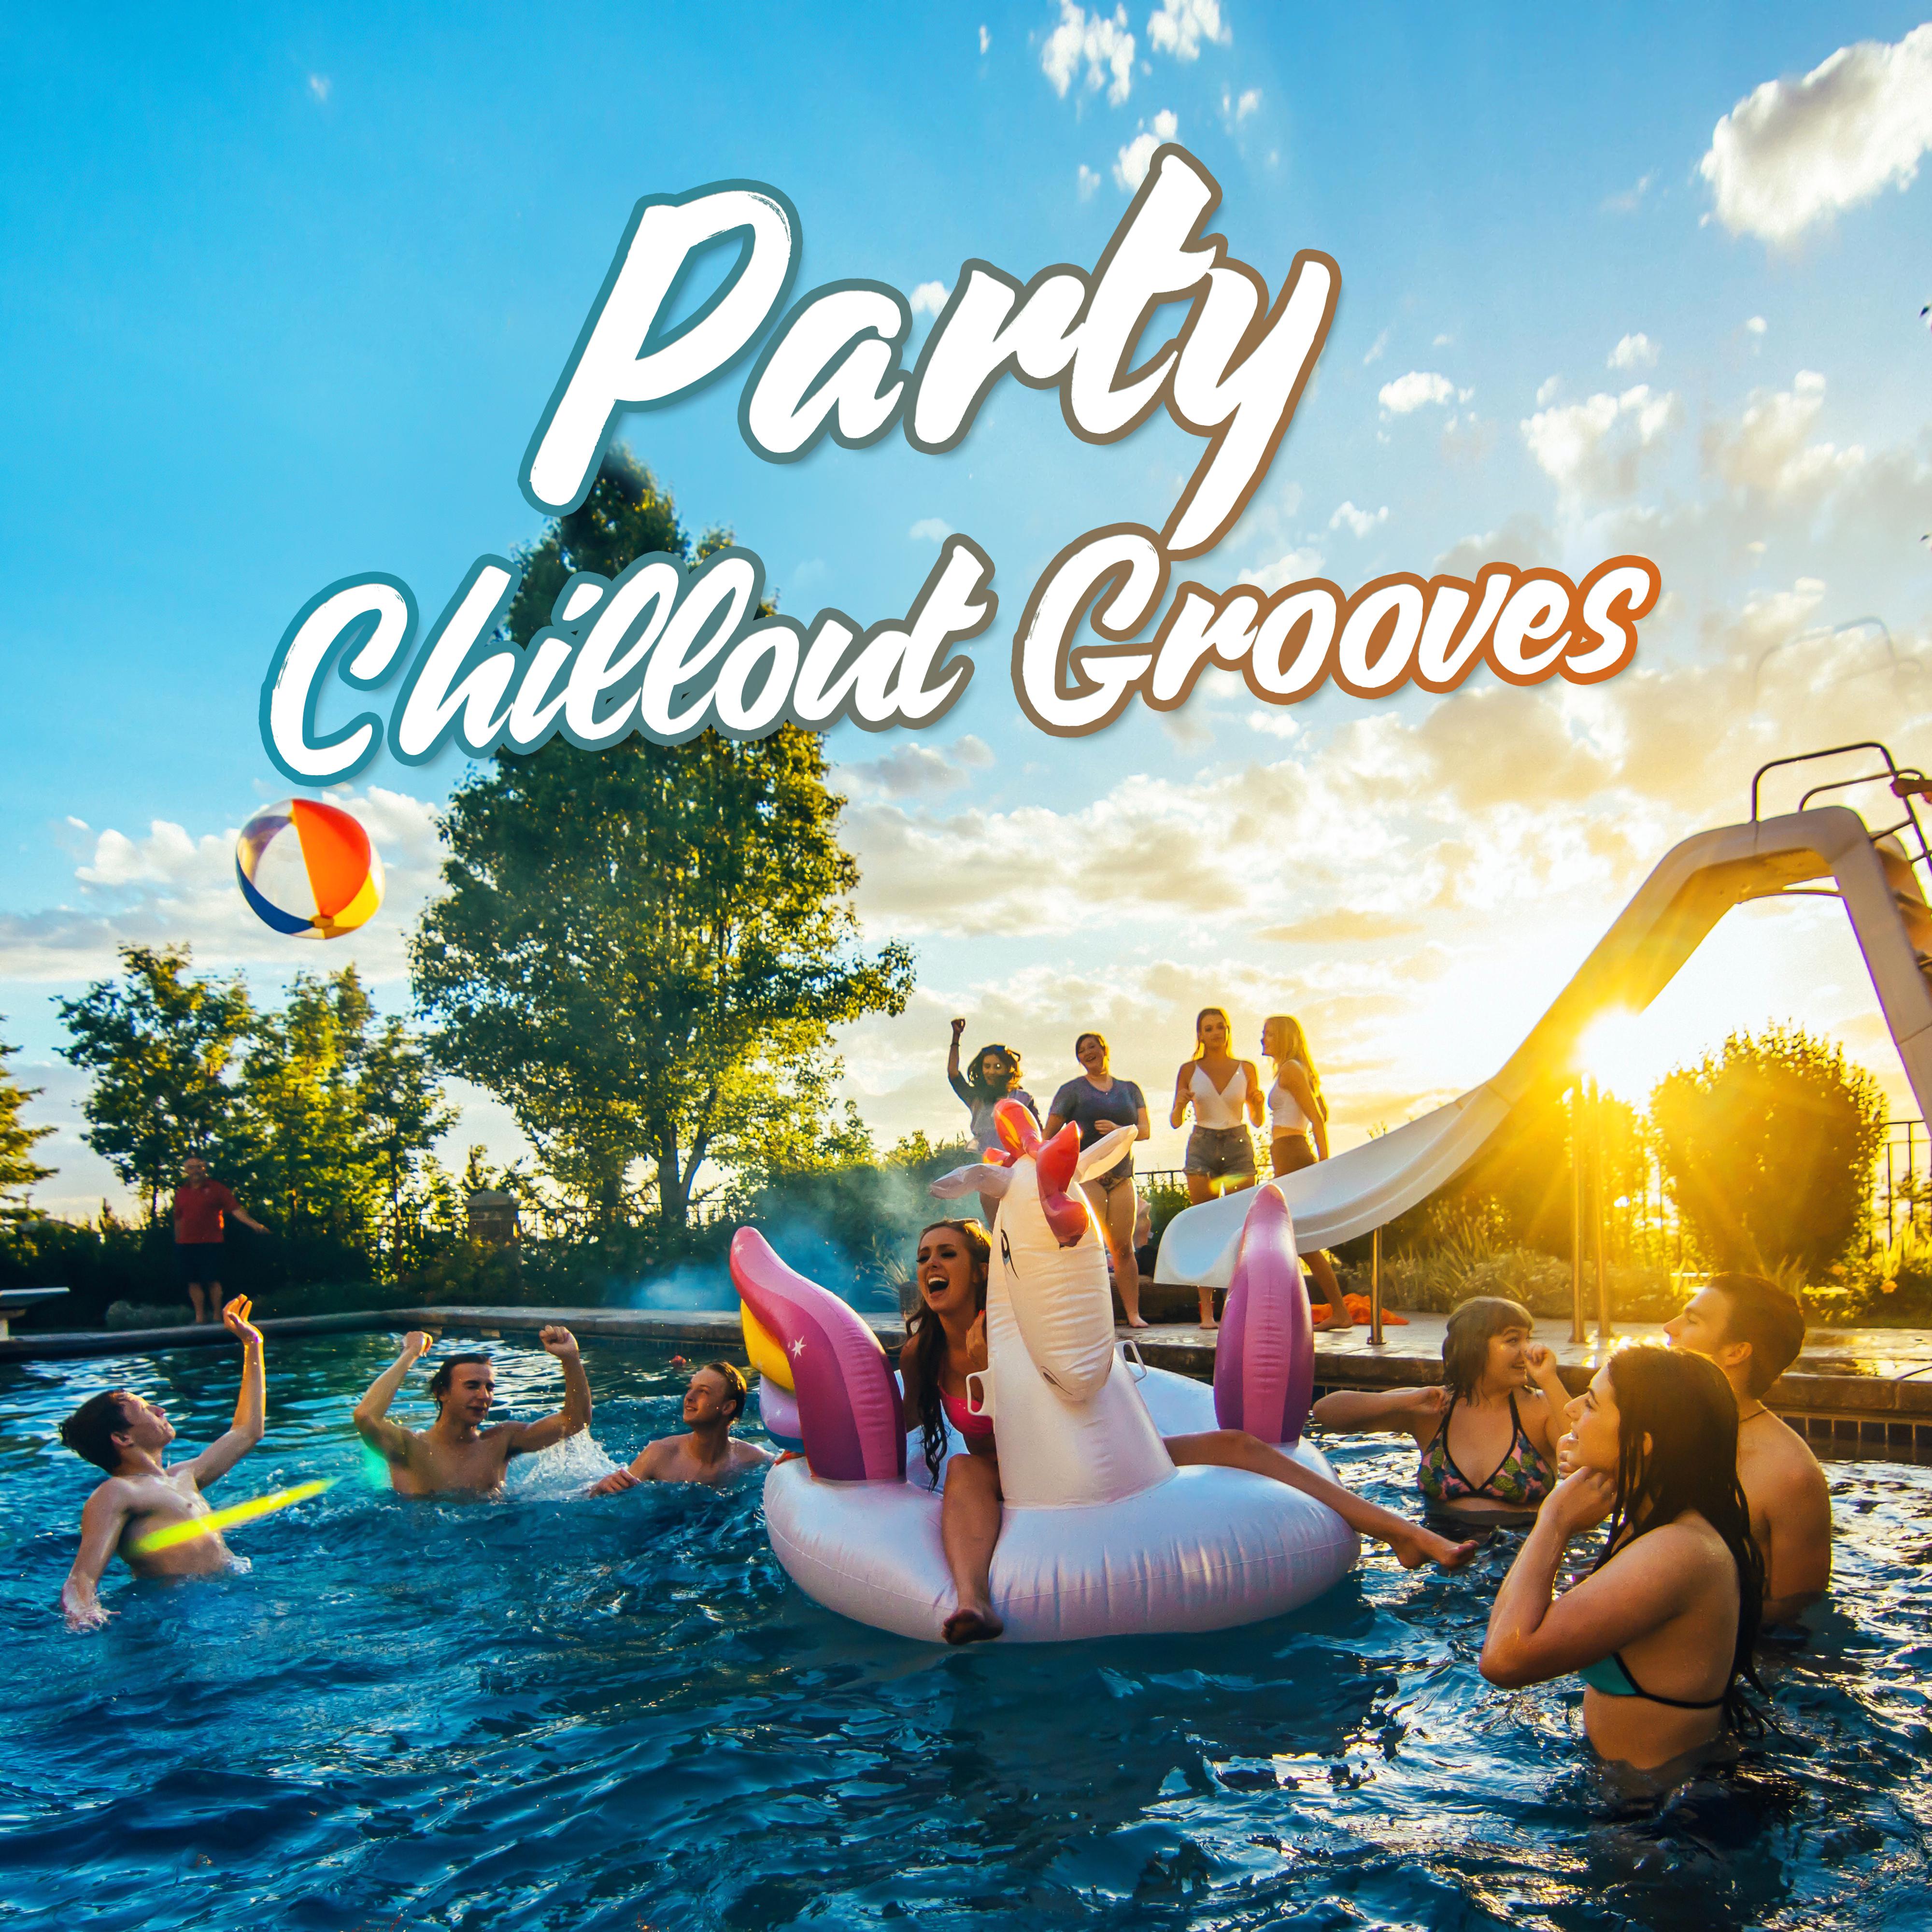 Party Chillout Grooves